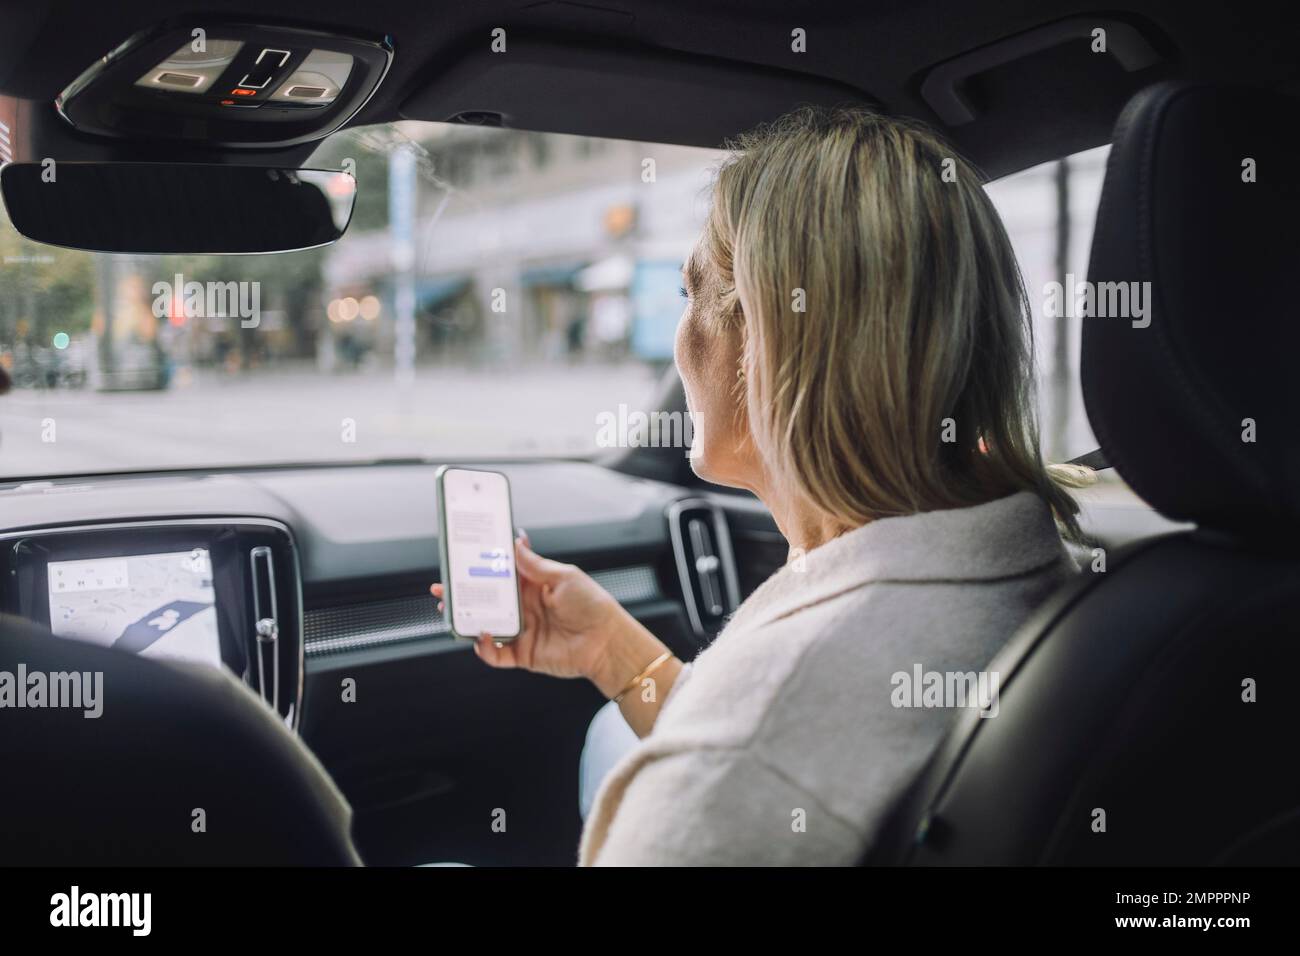 Mature woman using smart phone while sitting in front passenger seat Stock Photo